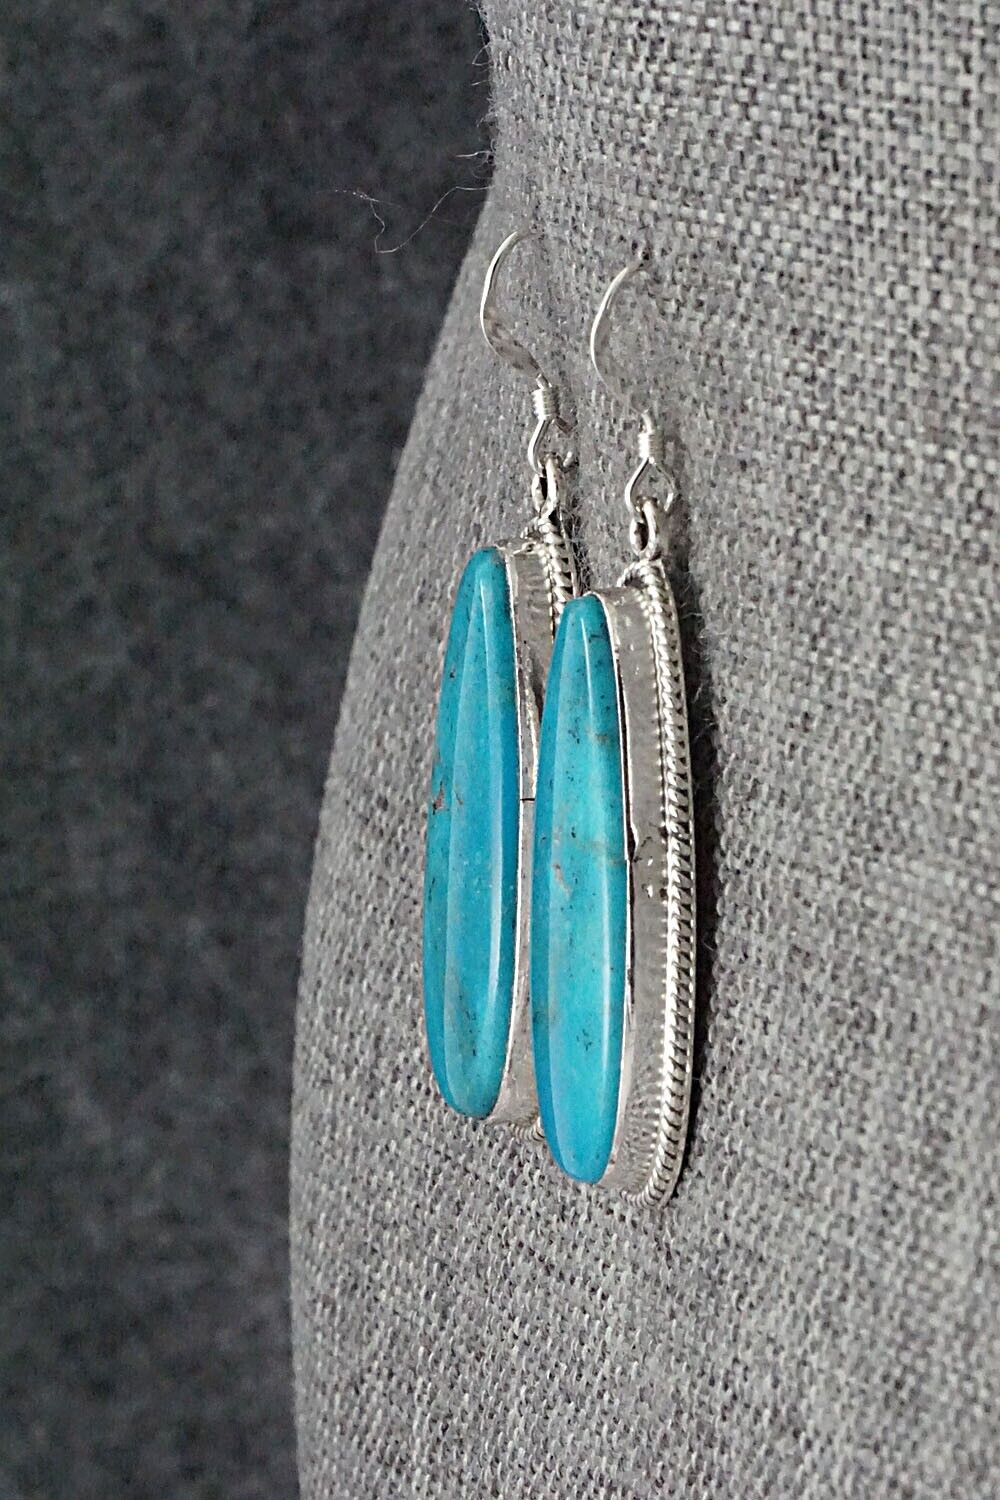 Turquoise and Sterling Silver Earrings - Sharon McCarthy